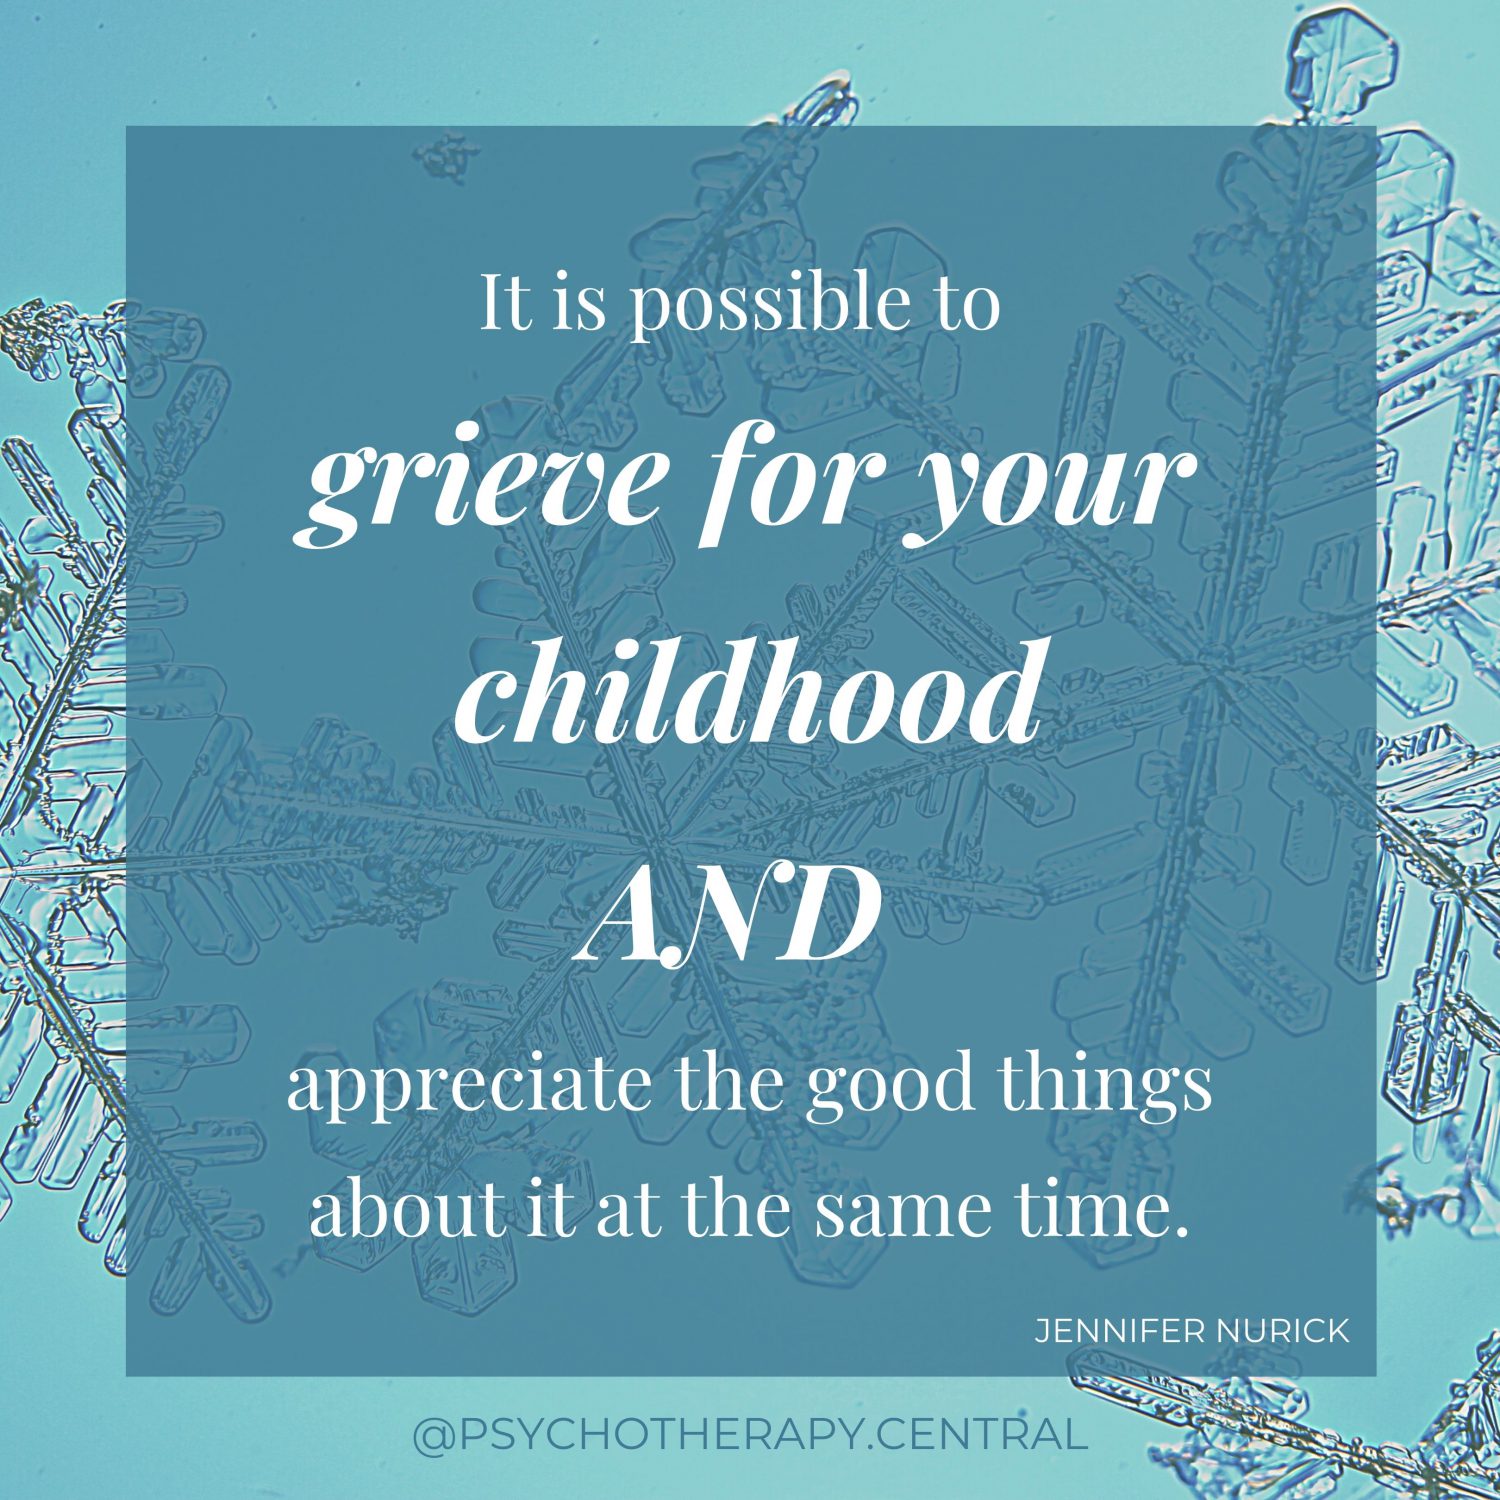 It Is Possible To Grieve For Your Childhood AND Appreciate The Good Things About It At The Same Time